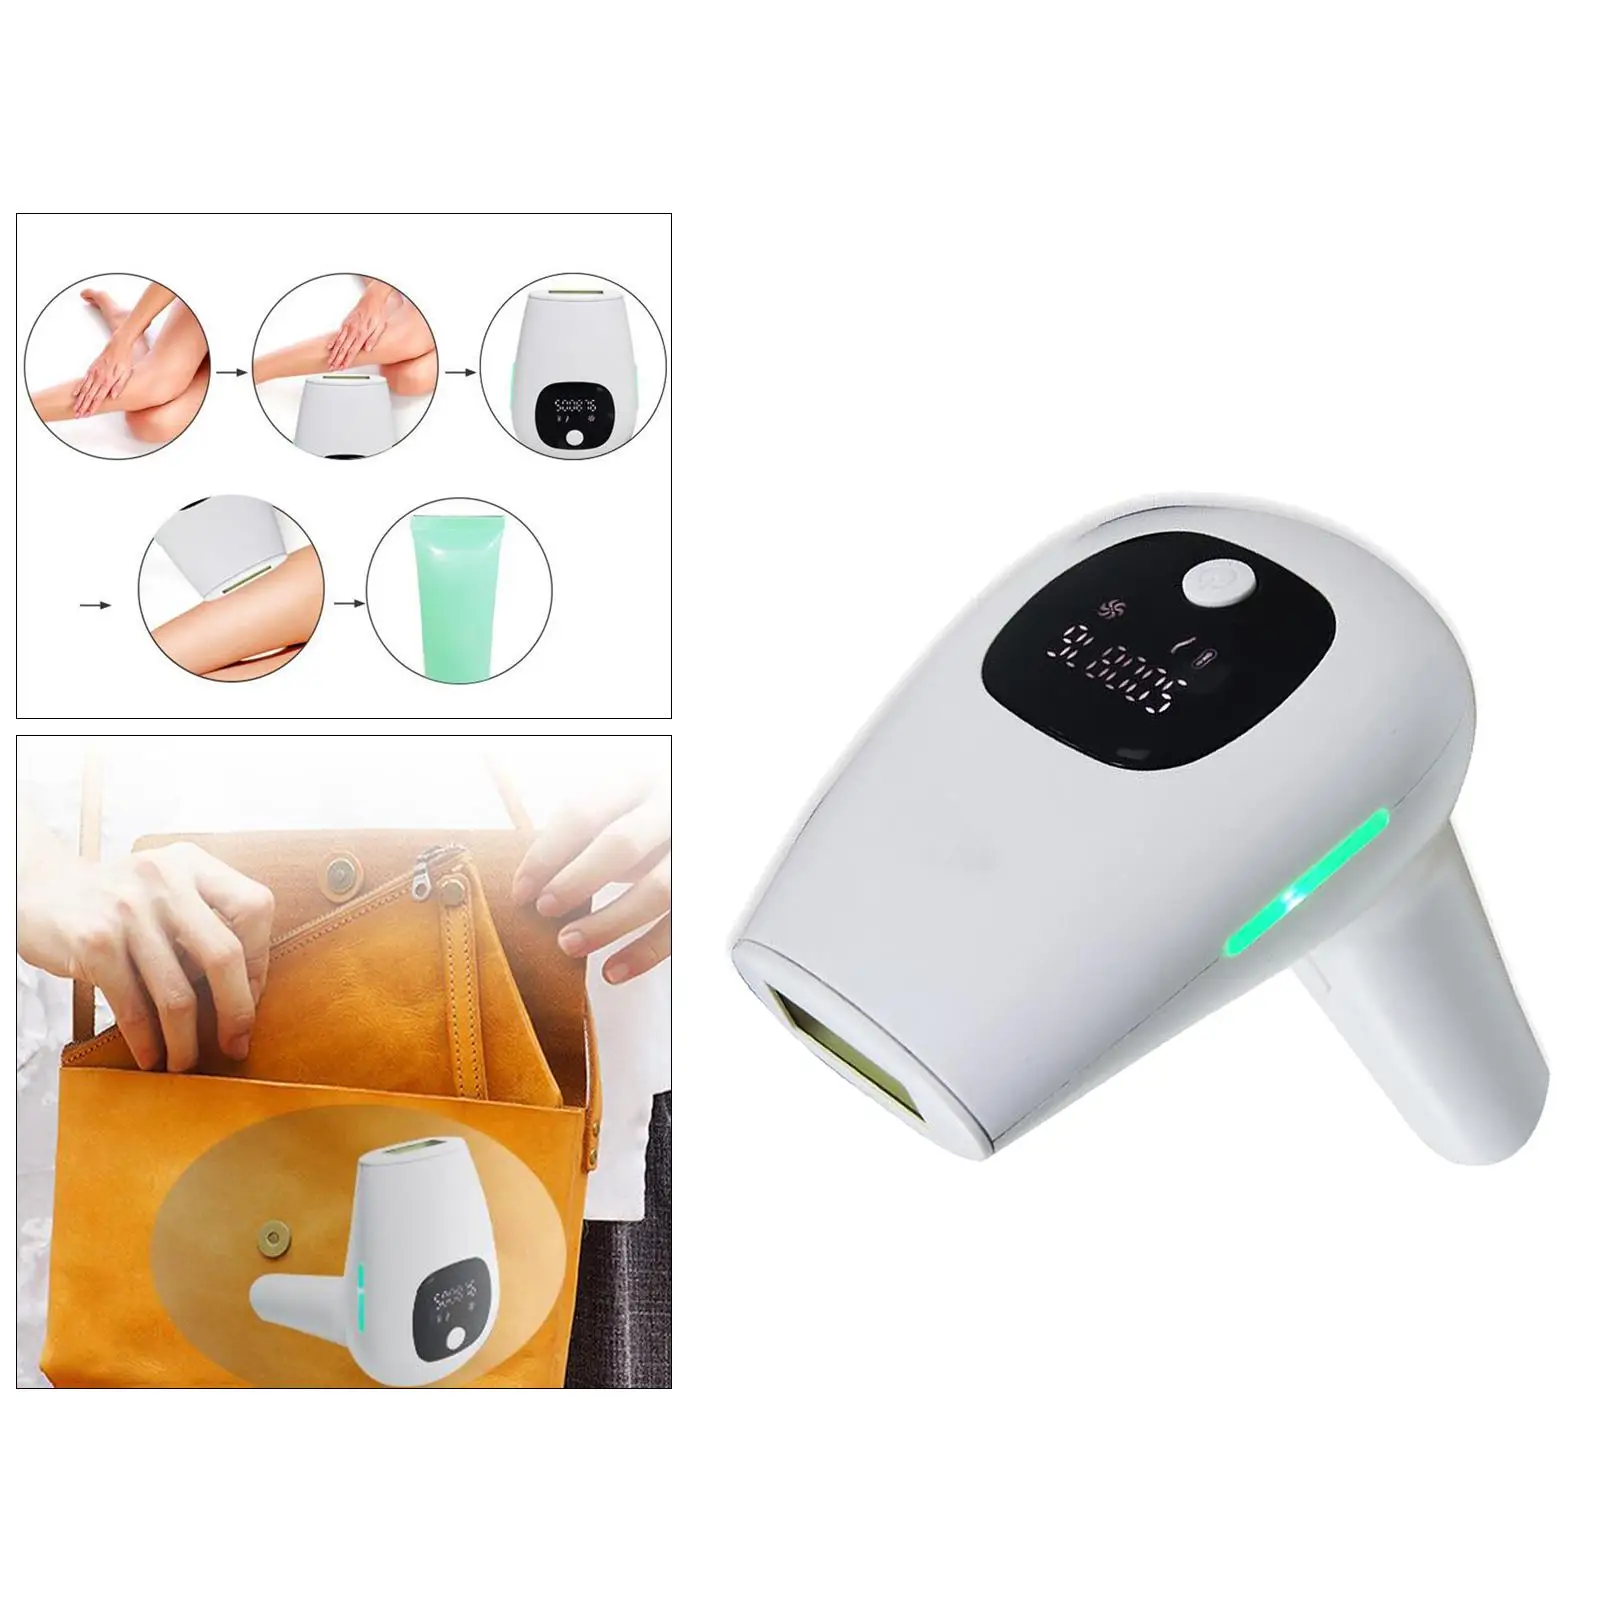 Painless  Hair Removal Device at Home Convenient for Armpits Back Legs Hair Removal Machine Depilator 